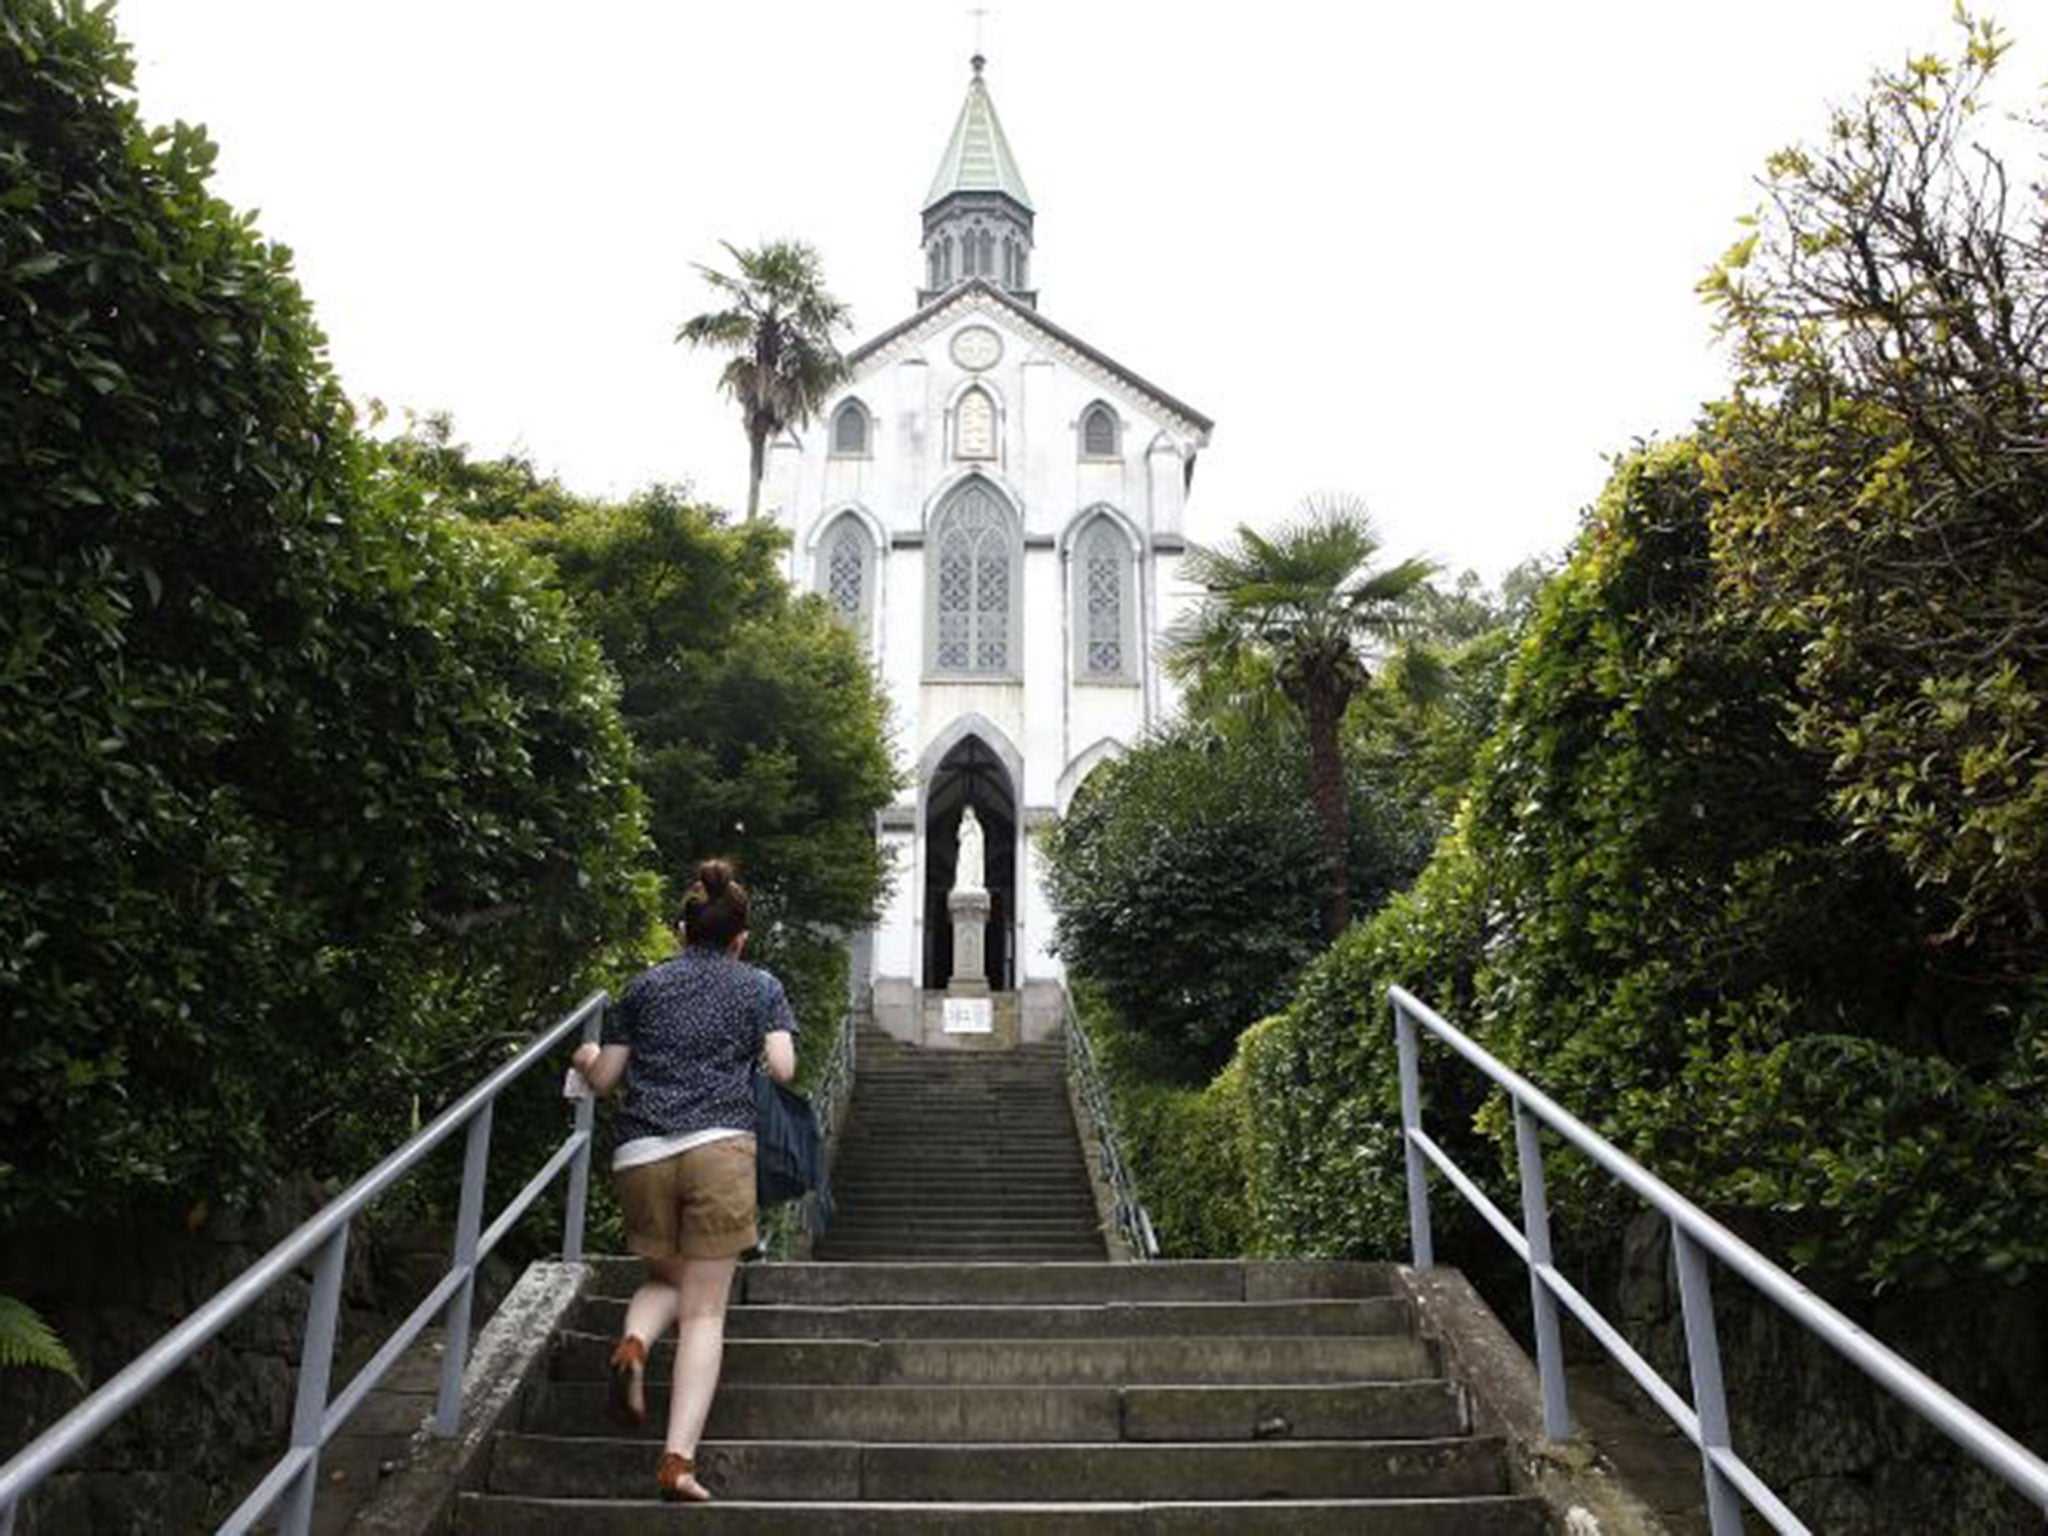 A woman visits Oura Church, the oldest church in Japan, also known as the Church of the 26 Japanese Martyrs